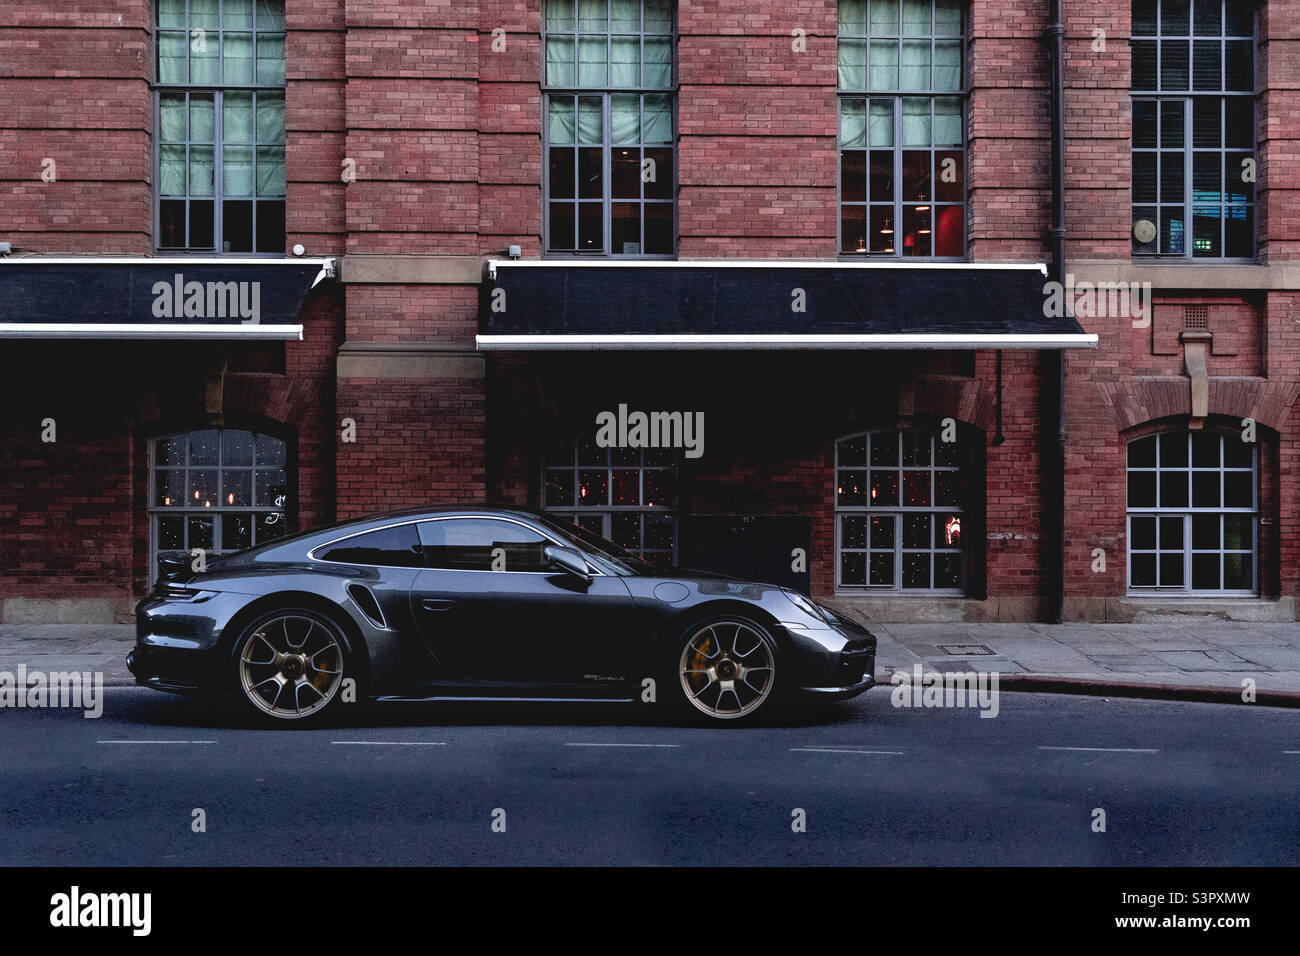 Expensive Porsche super car parked outside a luxury hotel building on a street in Leedsor London Stock Photo